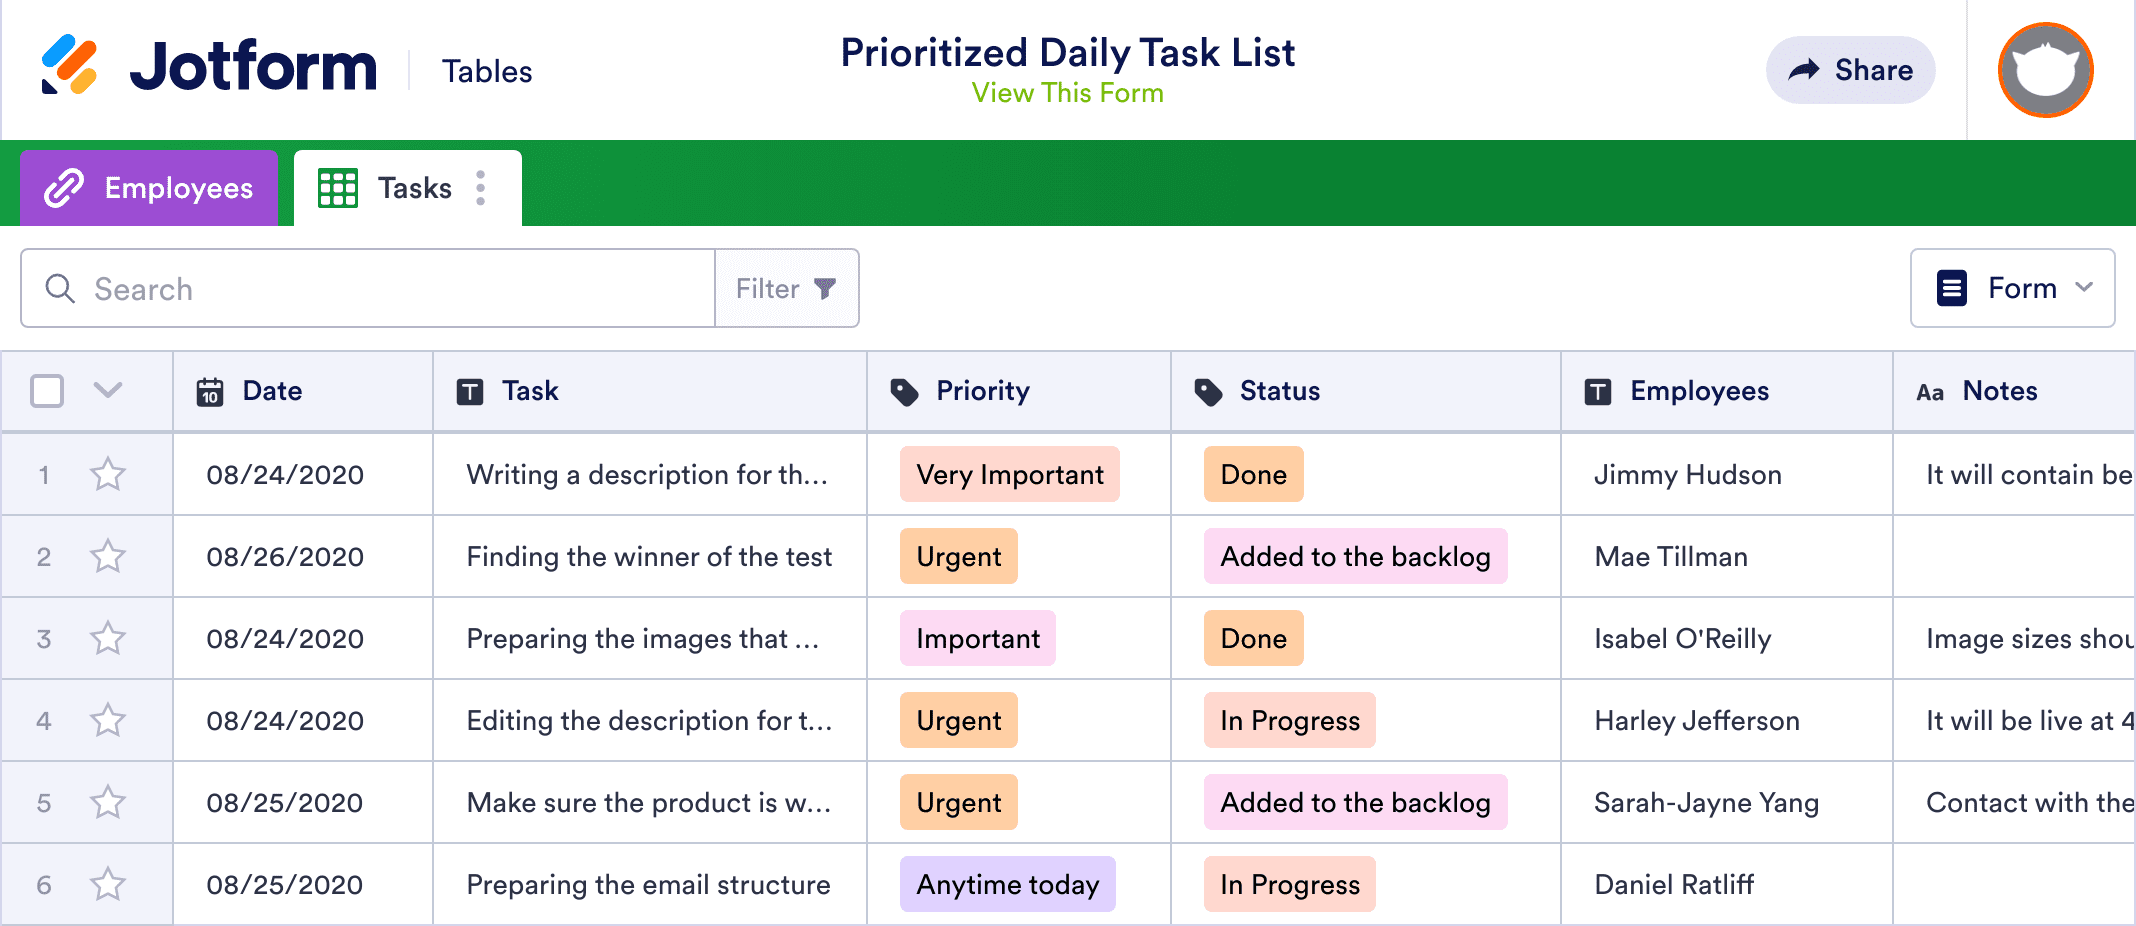 Prioritized Daily Task List Template Jotform Tables